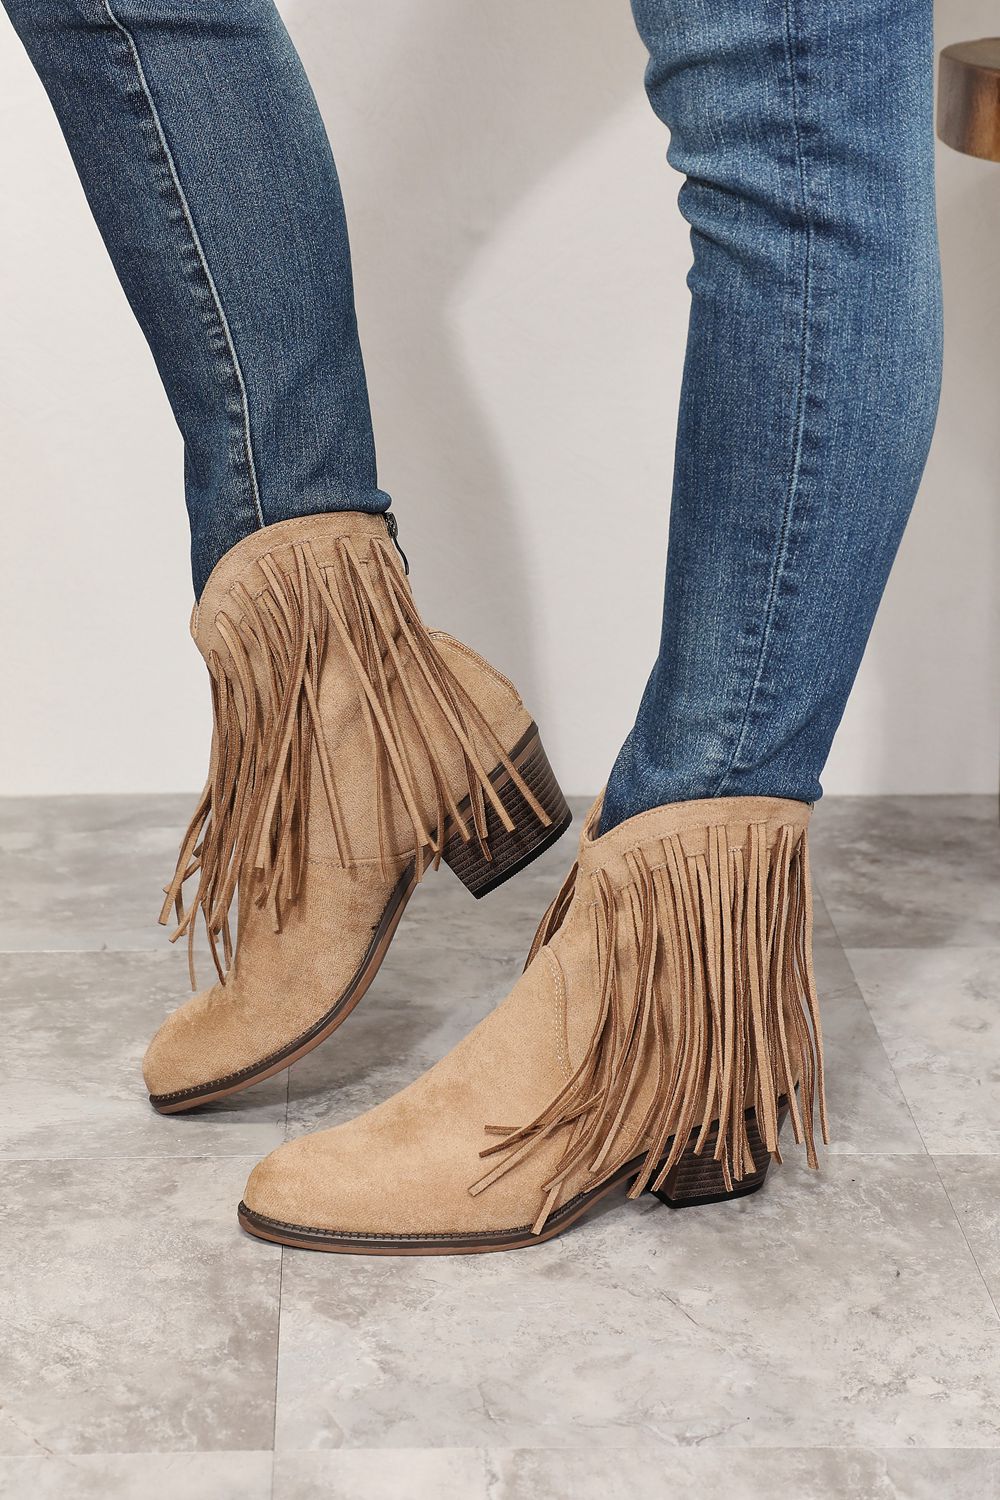 Legend Fringe Cowboy Western Pointy Toe Country Cowgirl Tan Ankle Bootie Boots